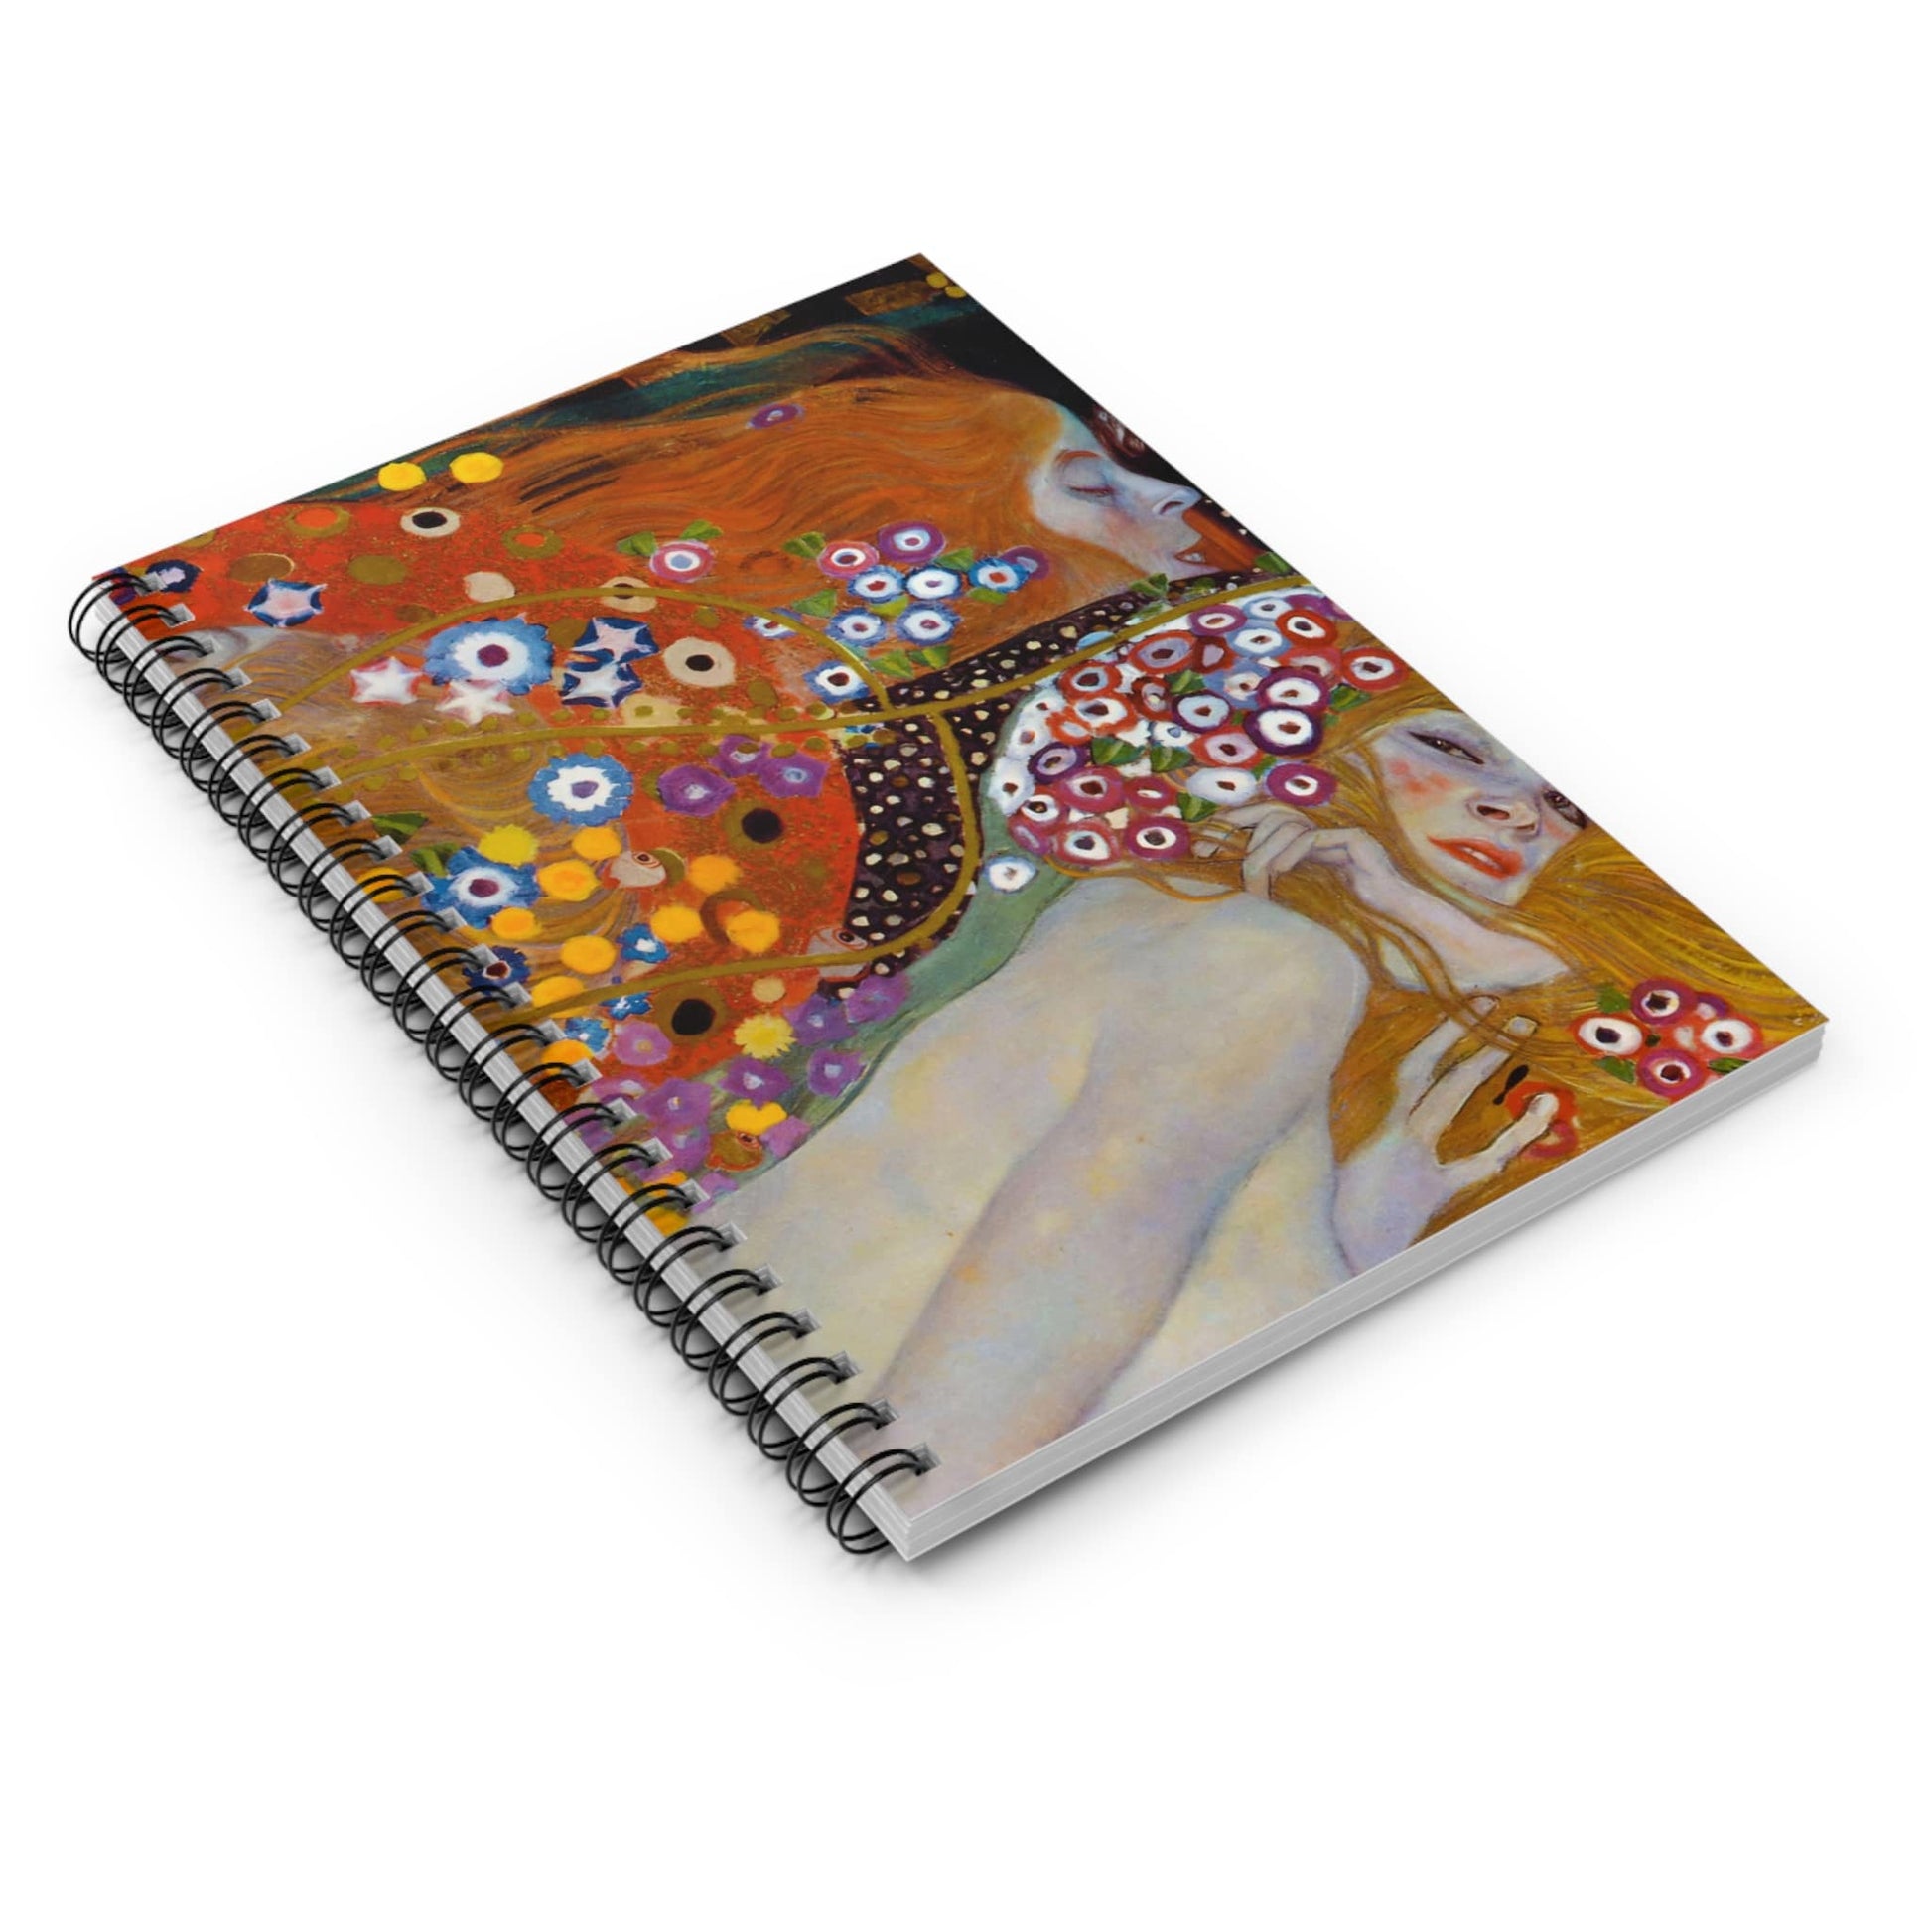 Abstract Women and Flowers Spiral Notebook Laying Flat on White Surface